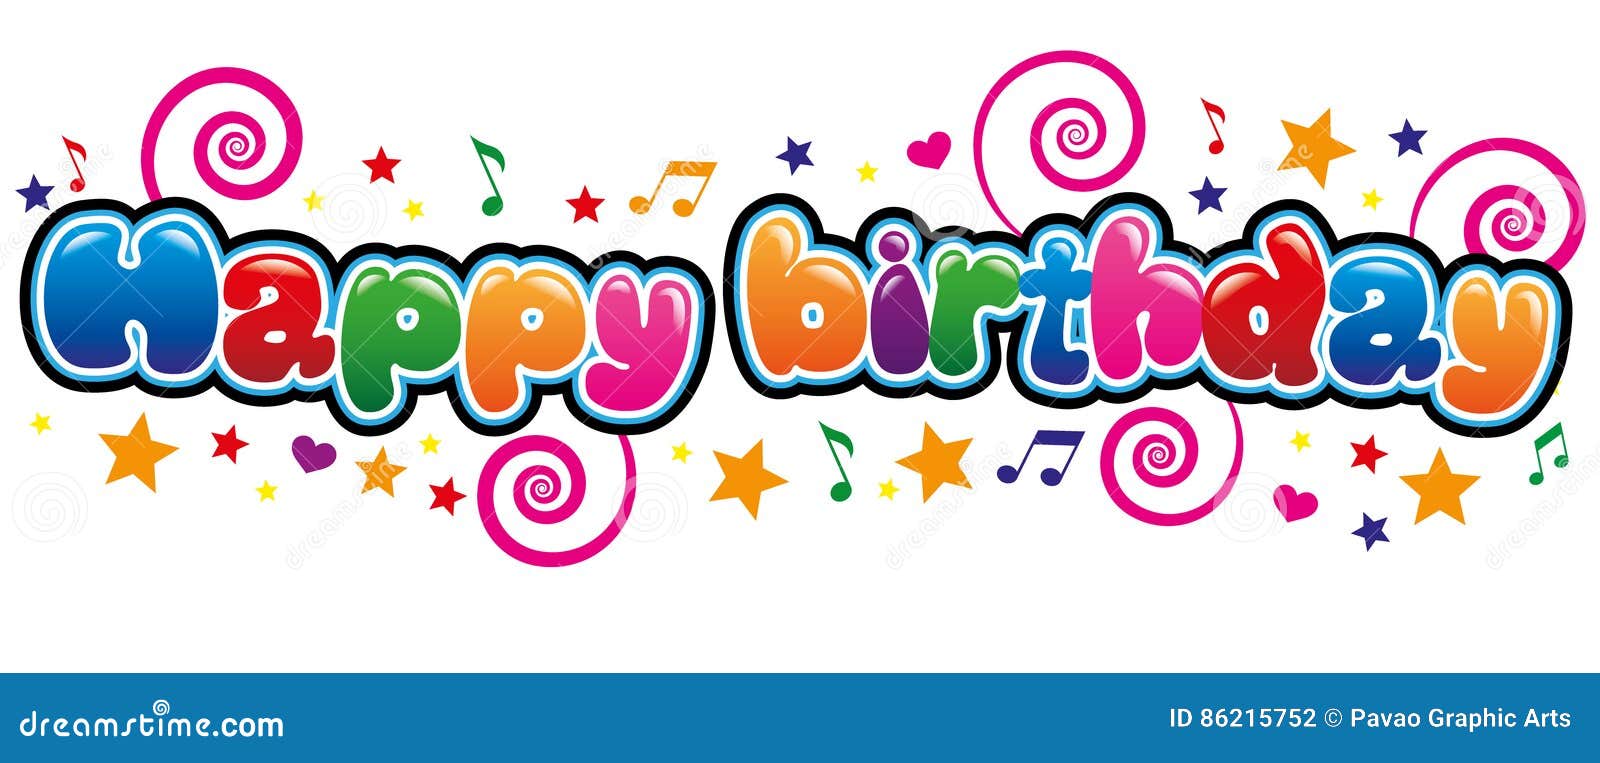 Happy Birthday Stock Vector. Illustration Of Font, Colors - 86215752